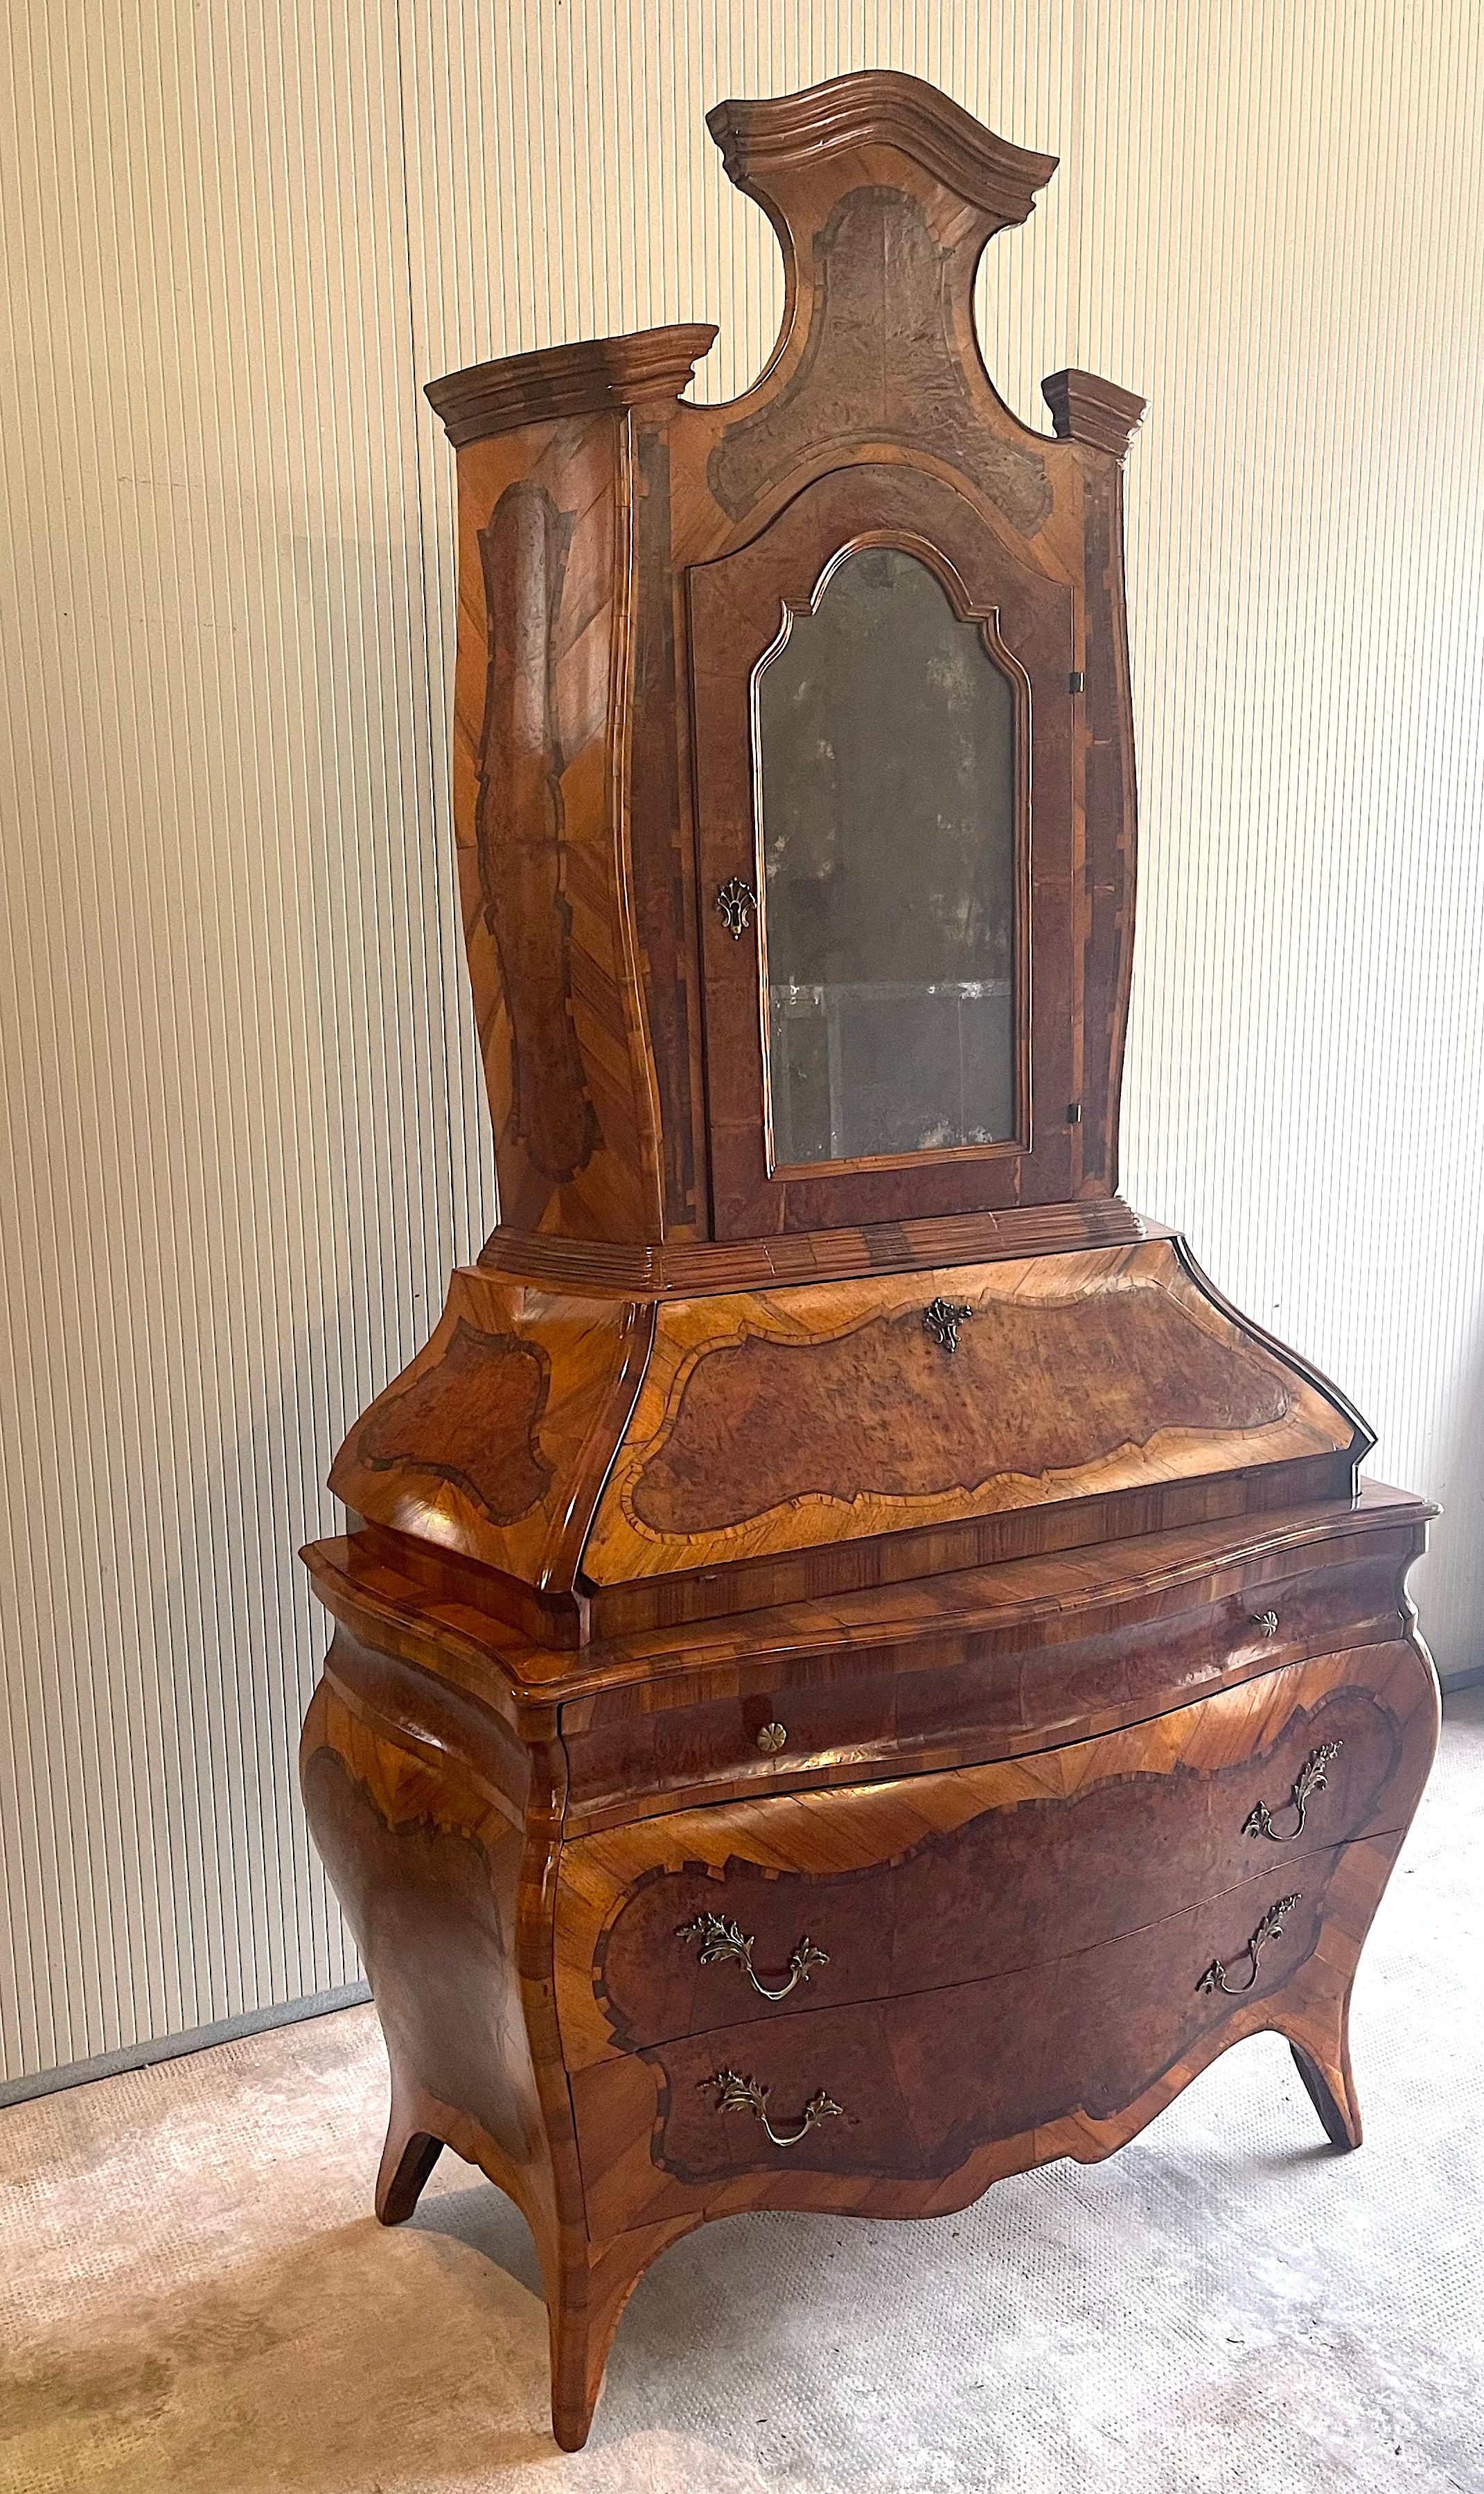 Trumeau datable to about 1860, from northern Italy.

The cabinet in question is entirely veneered in walnut and burl walnut, filleted in Fine woods, with a fir back and interior. Two compositional parts are present: the upper part of the riser